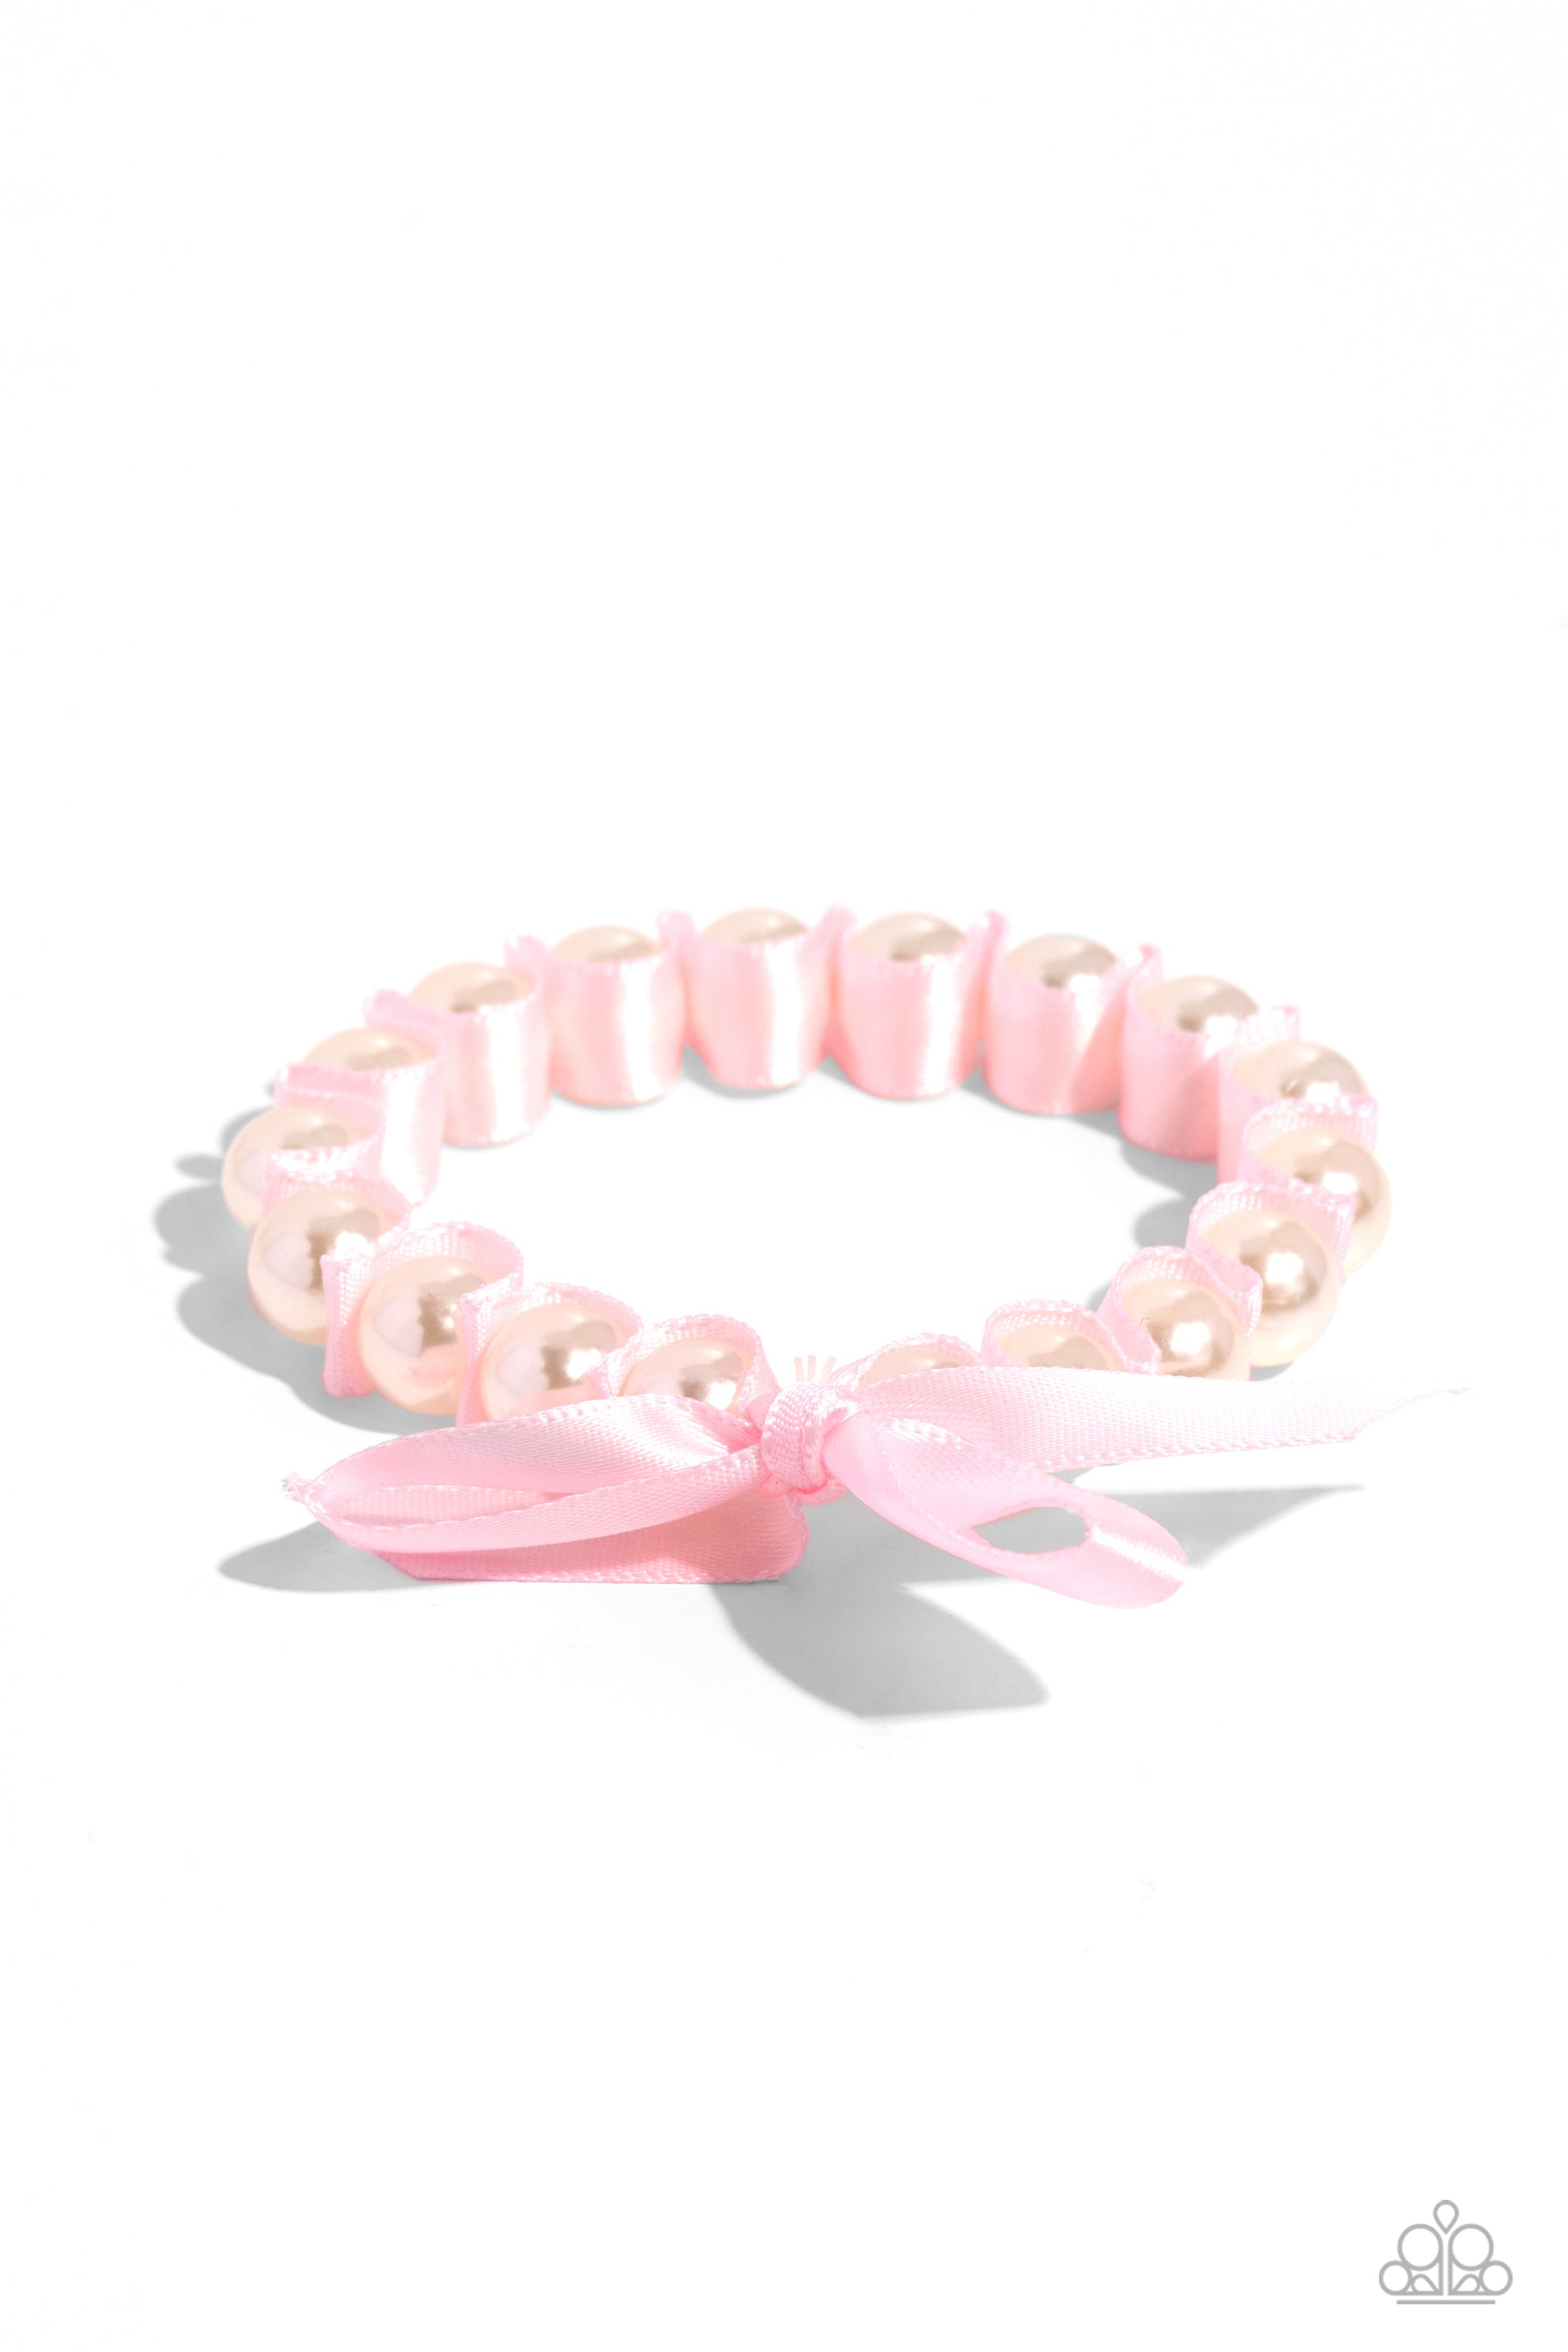 <p>Paparazzi Accessories - Ribbon Rarity - Pink Pearl Bracelets delicately wrapped in the folds of a baby pink ribbon, gleaming white pearls are infused along an elastic stretchy band around the wrist for a feminine, girly statement.</p> <p><i>Sold as one individual bracelet.</i></p>